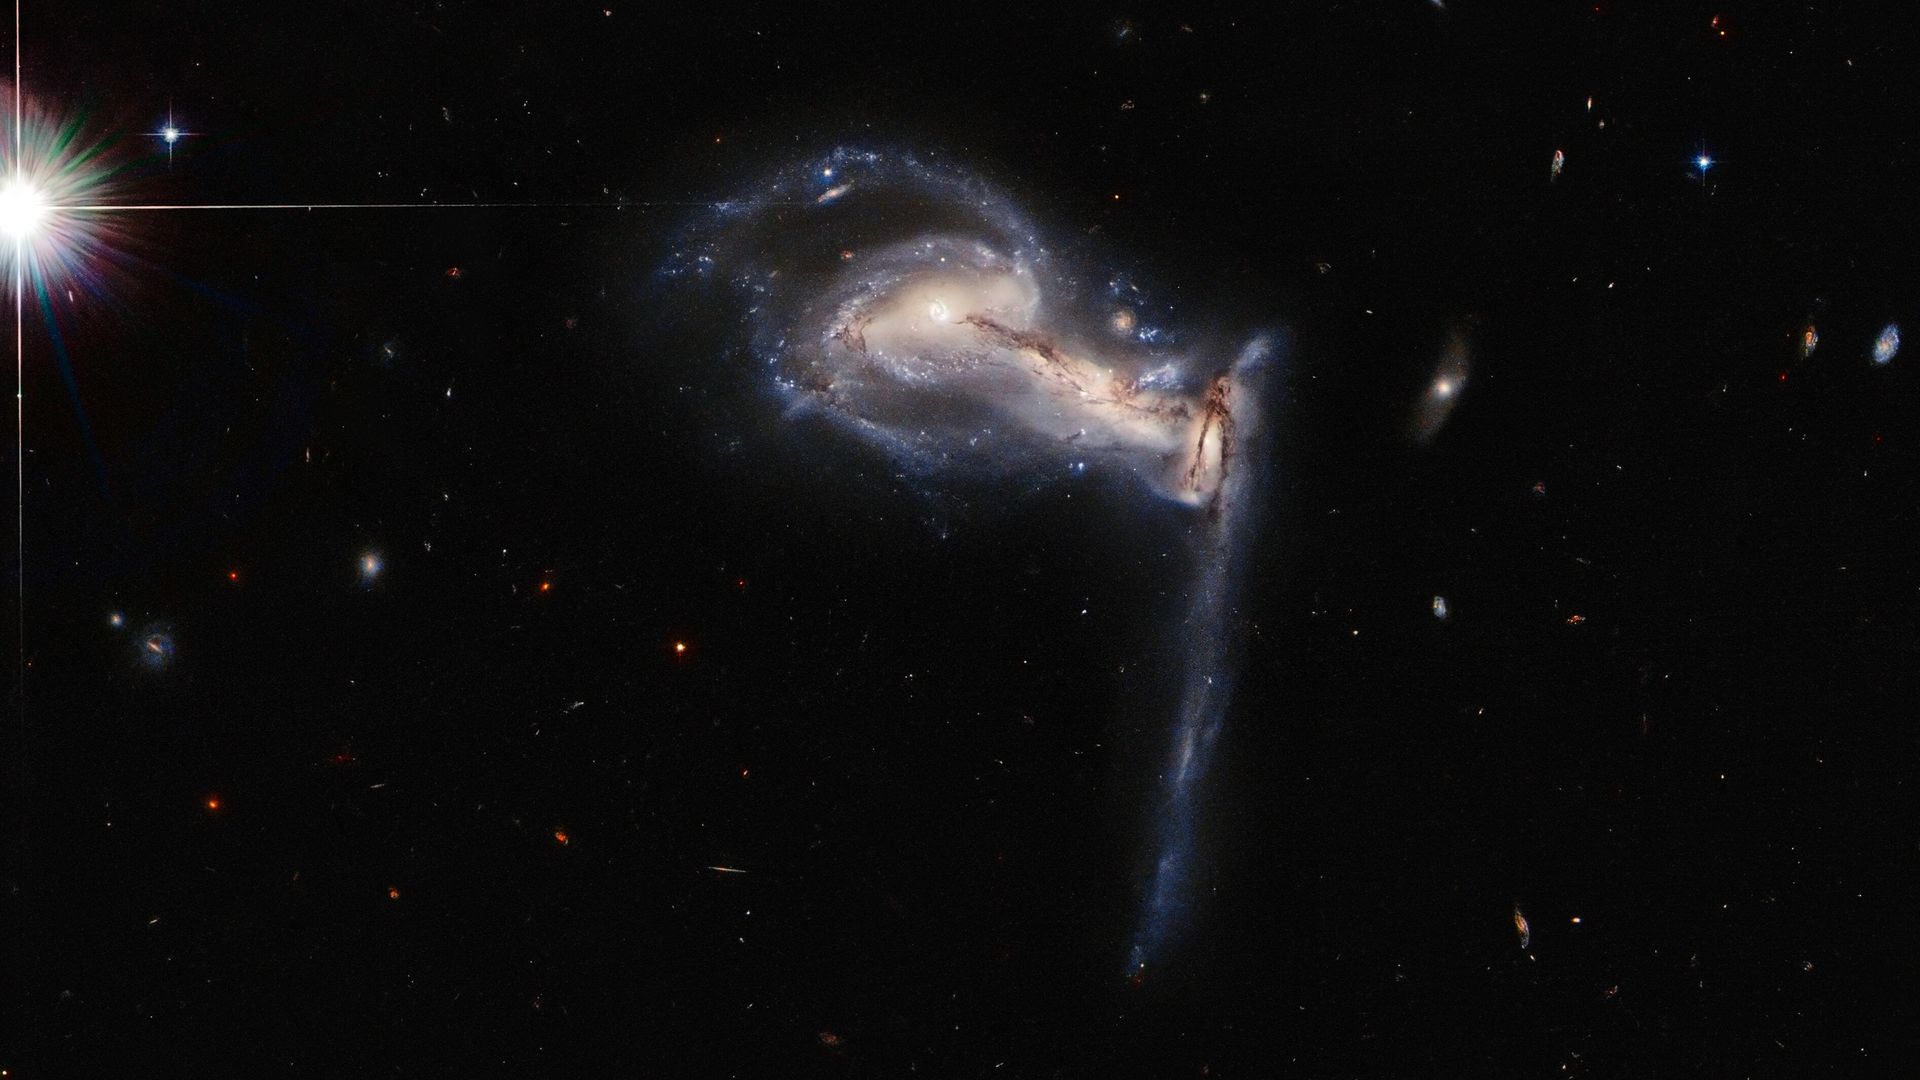 A trio of galaxies interacting as seen by the Hubble Space Telescope